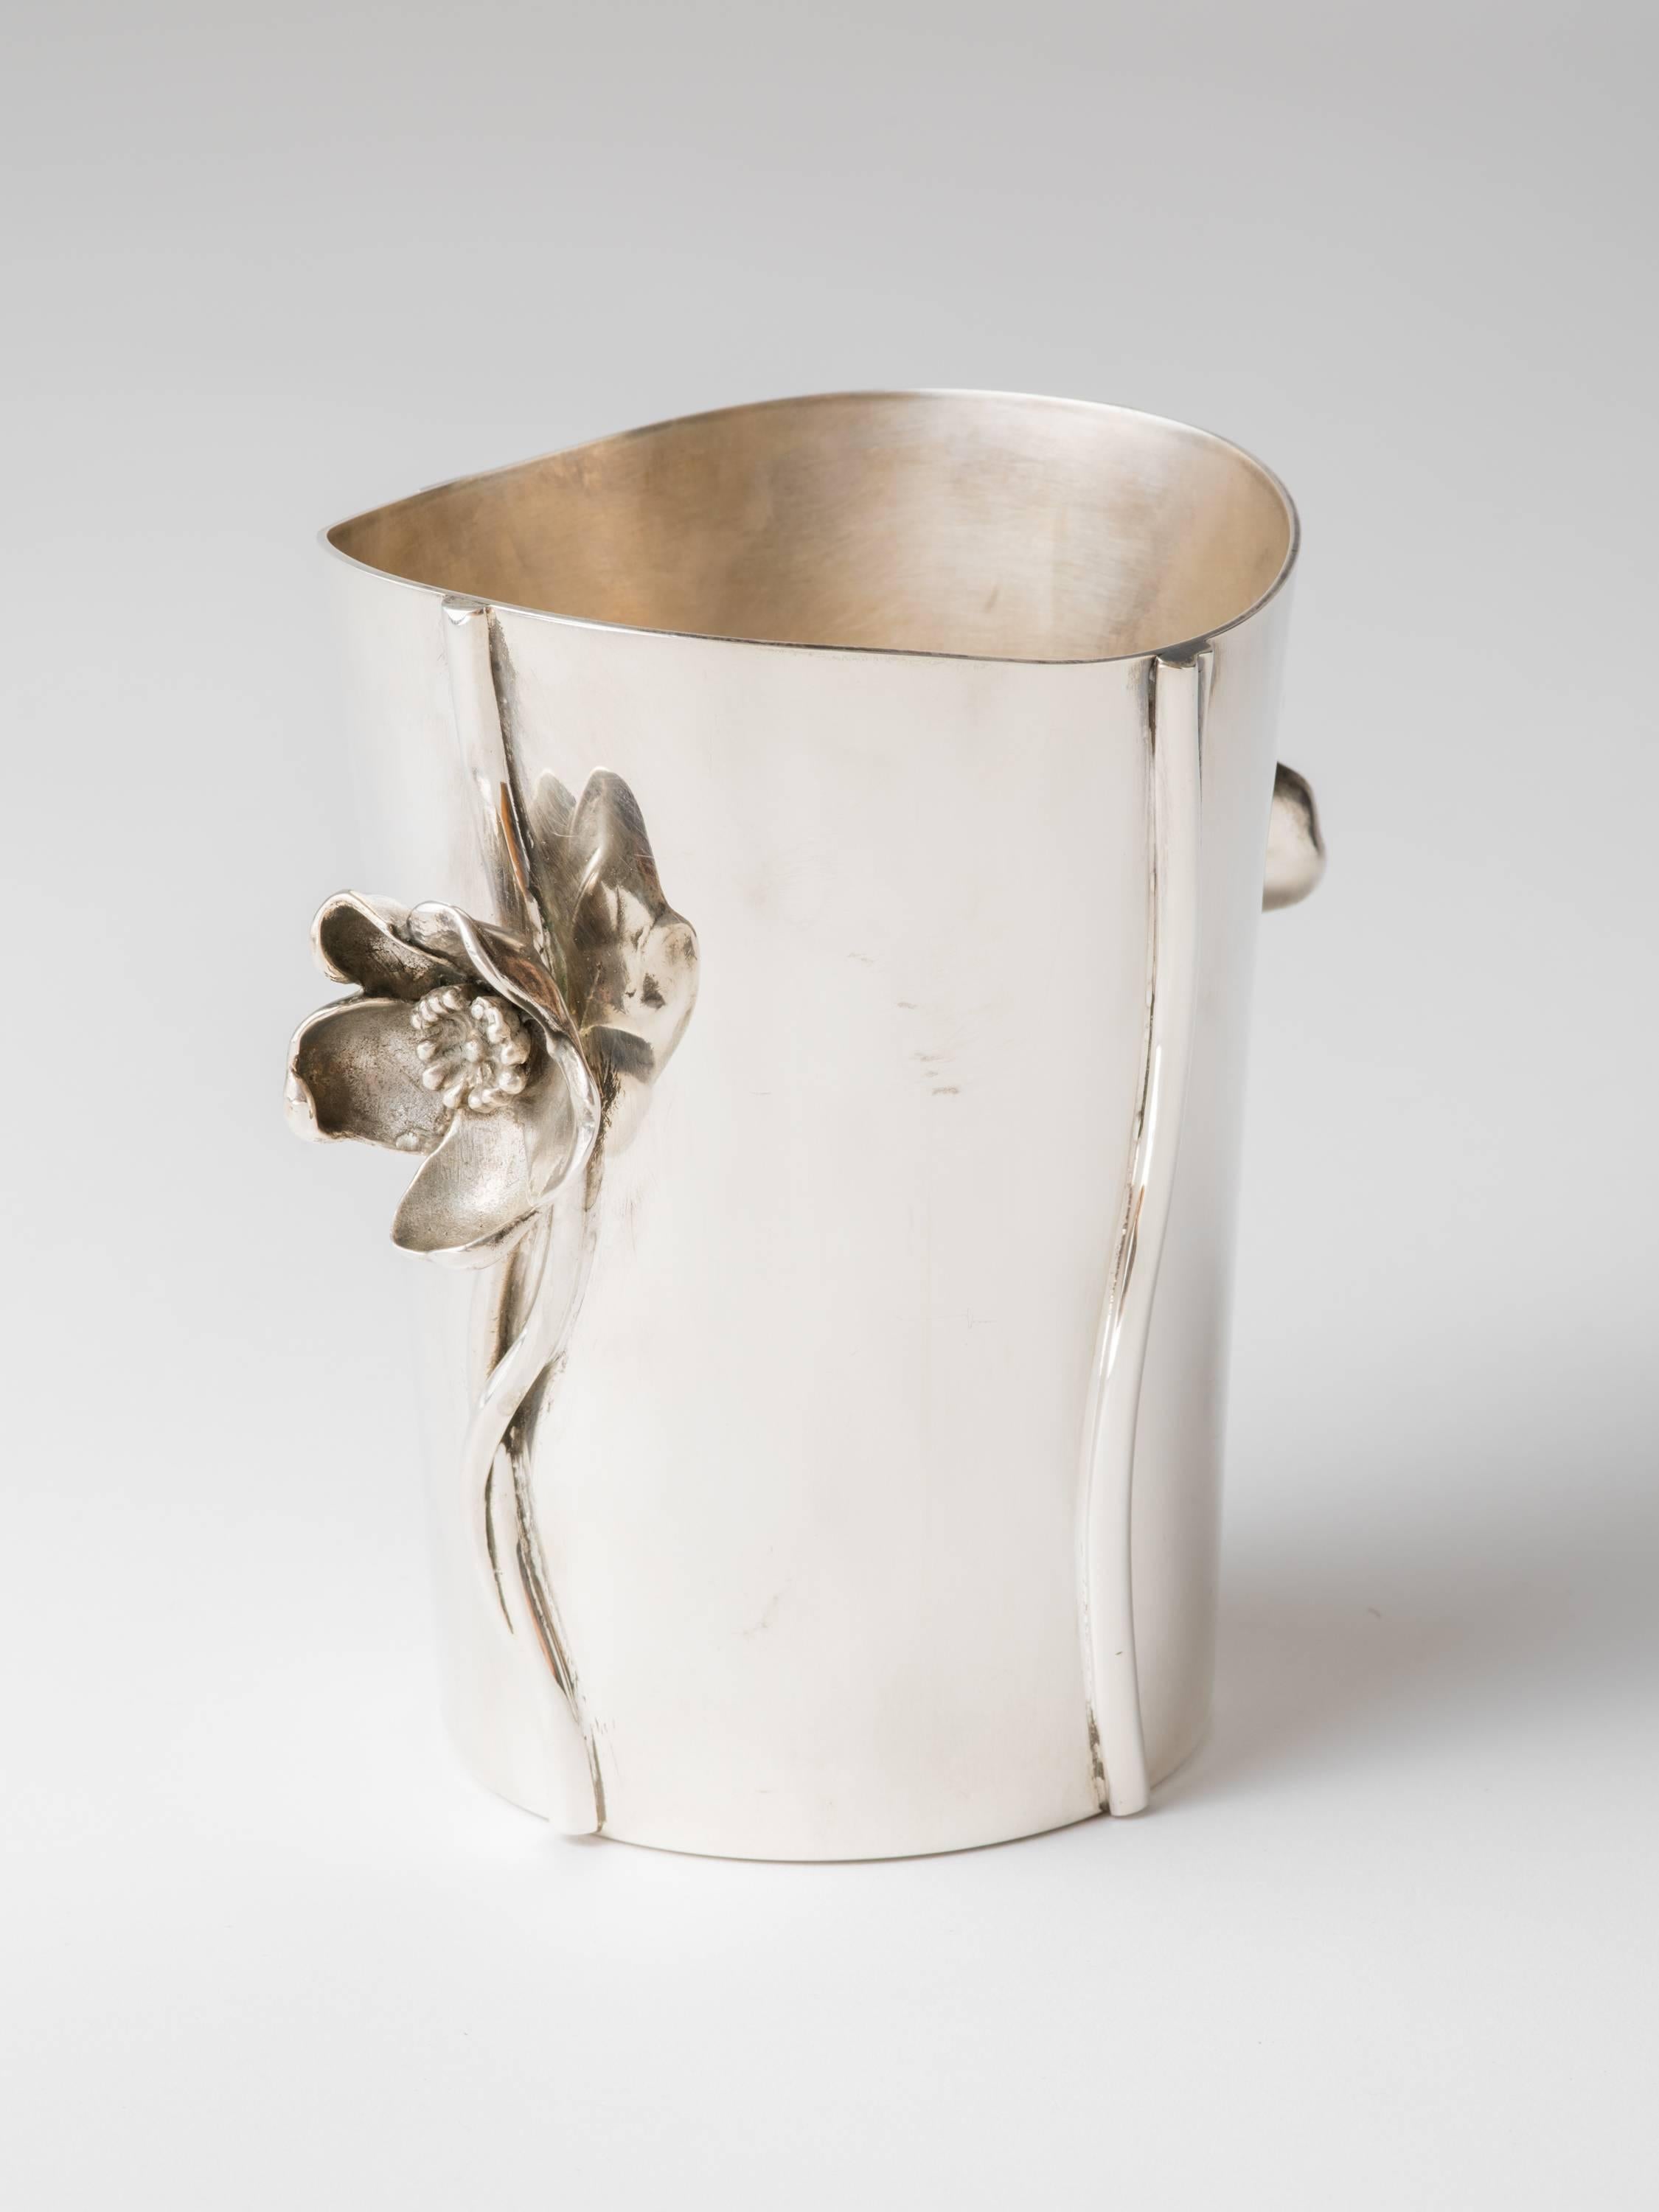 Christofle silver plate wine cooler with hand-wrought anenome handles, France, 20th C.